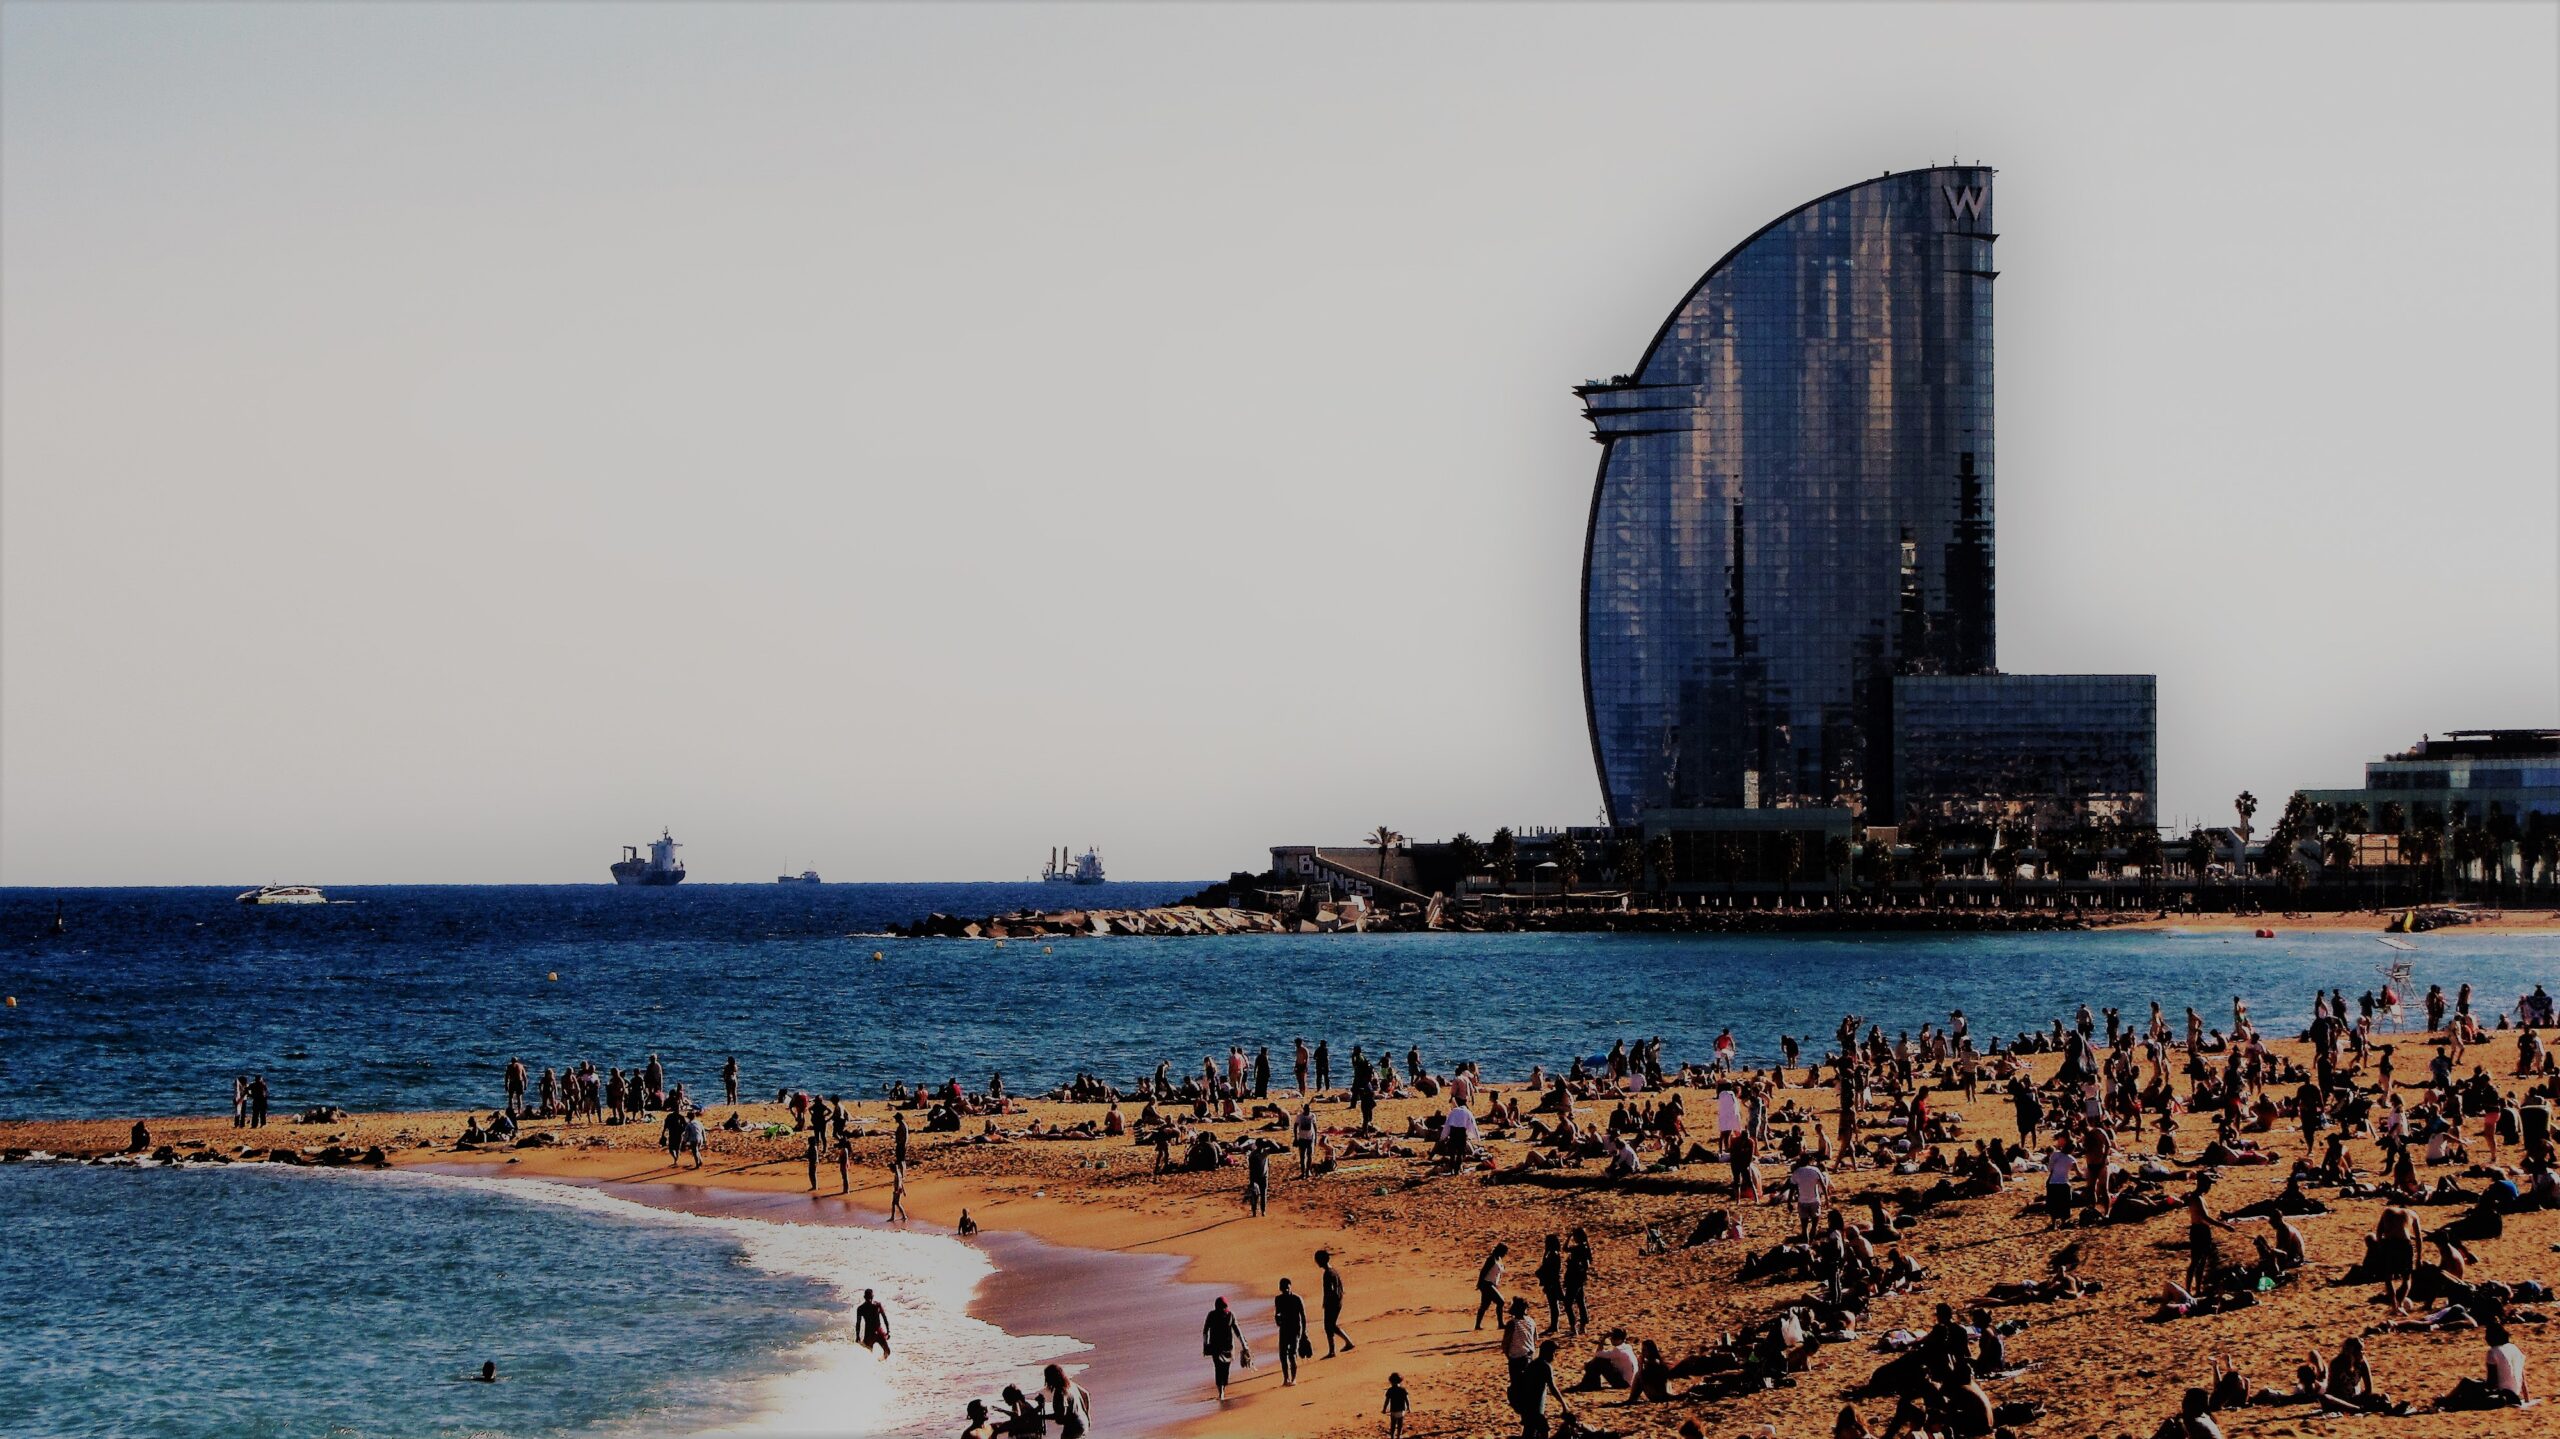 Barcelona: The Number One City of My Dreams